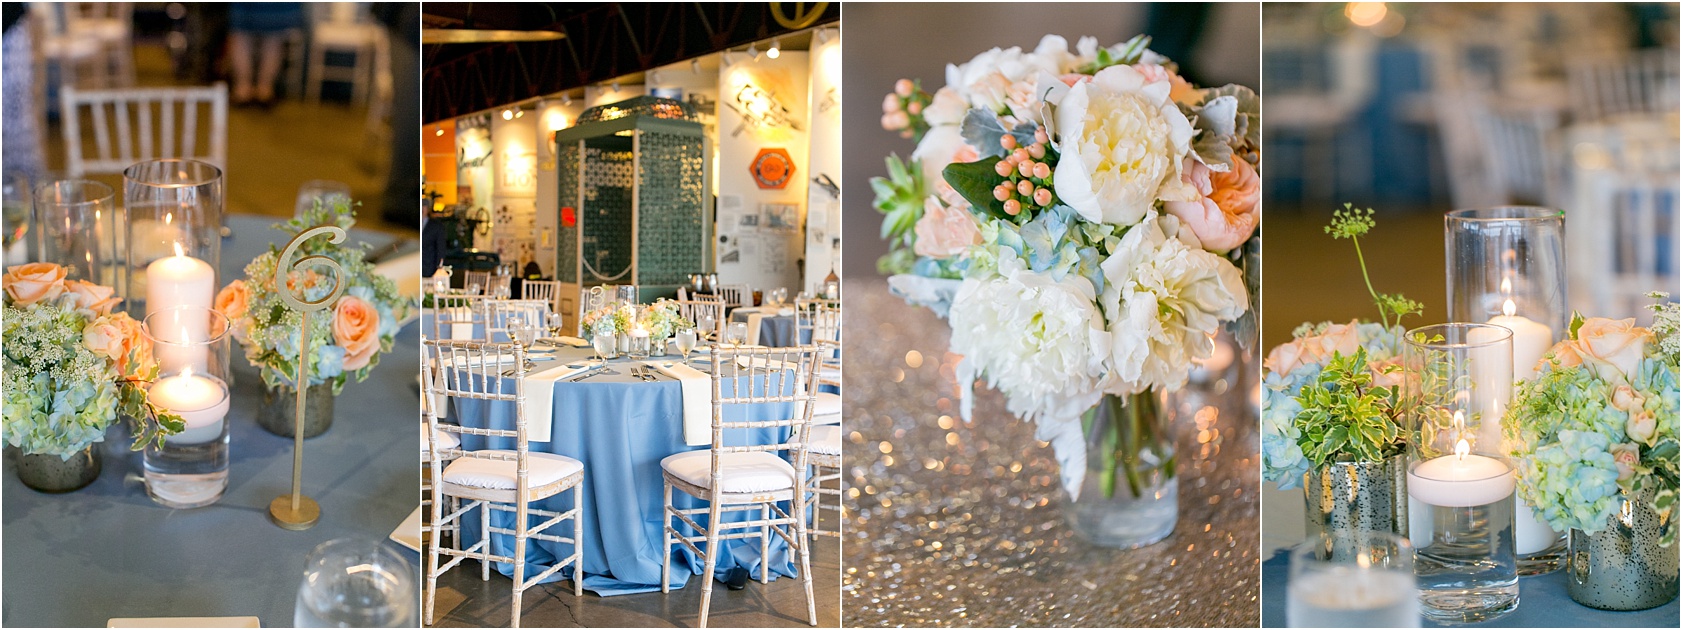 Rowland Baltimore Museum of Industry Wedding Living Radiant Photography photos_0119.jpg